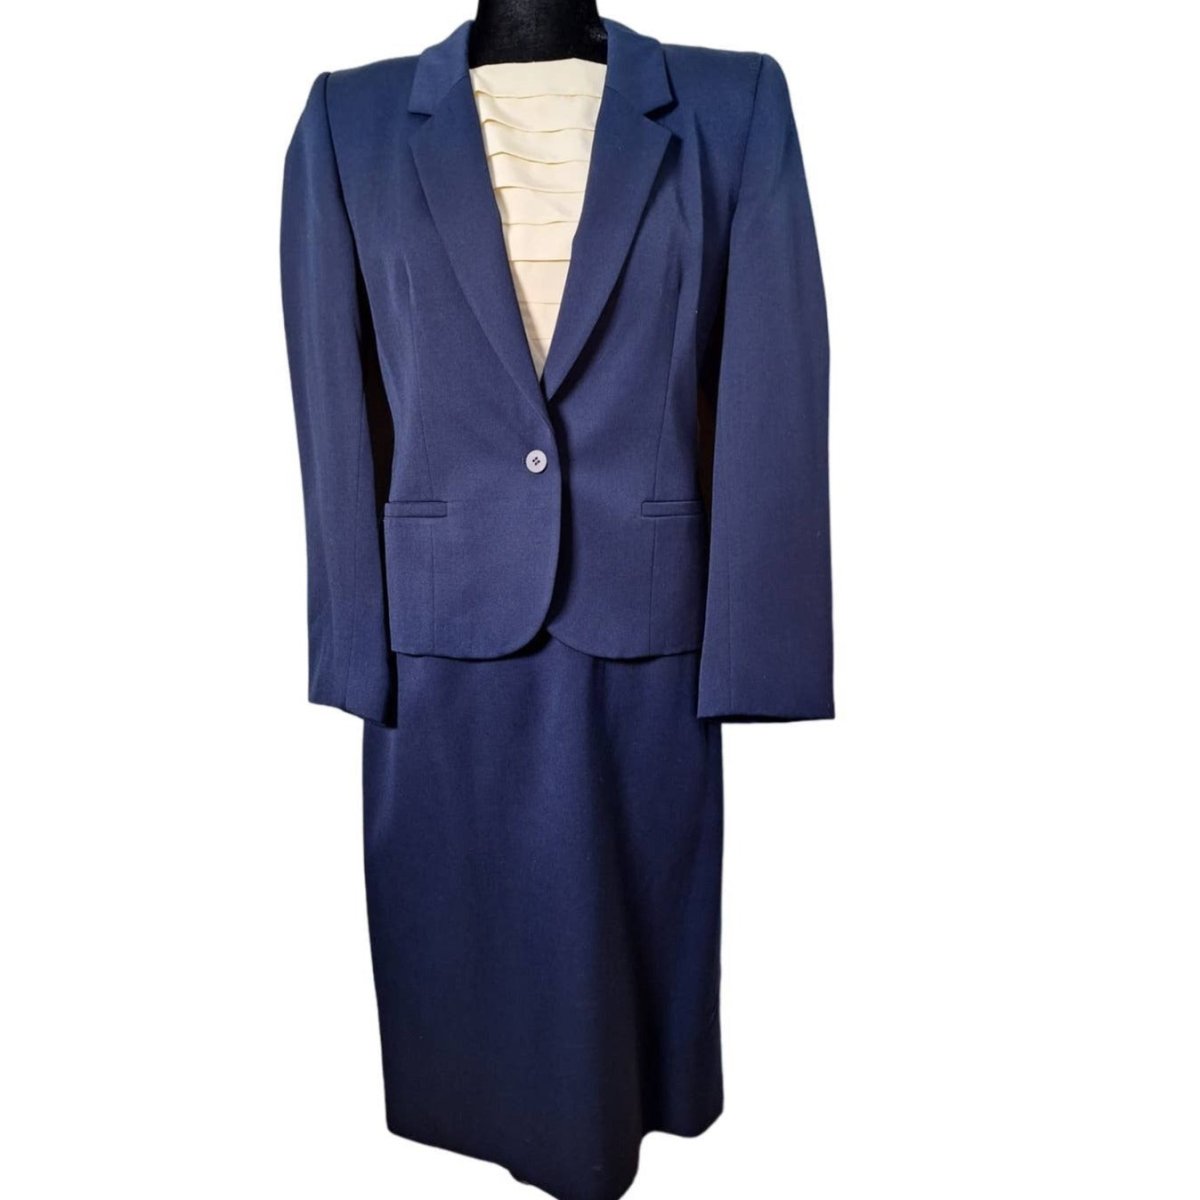 Vintage 80s All Wool Dark Blue Skirt Suit Women's Size Small 4 - themallvintage The Mall Vintage